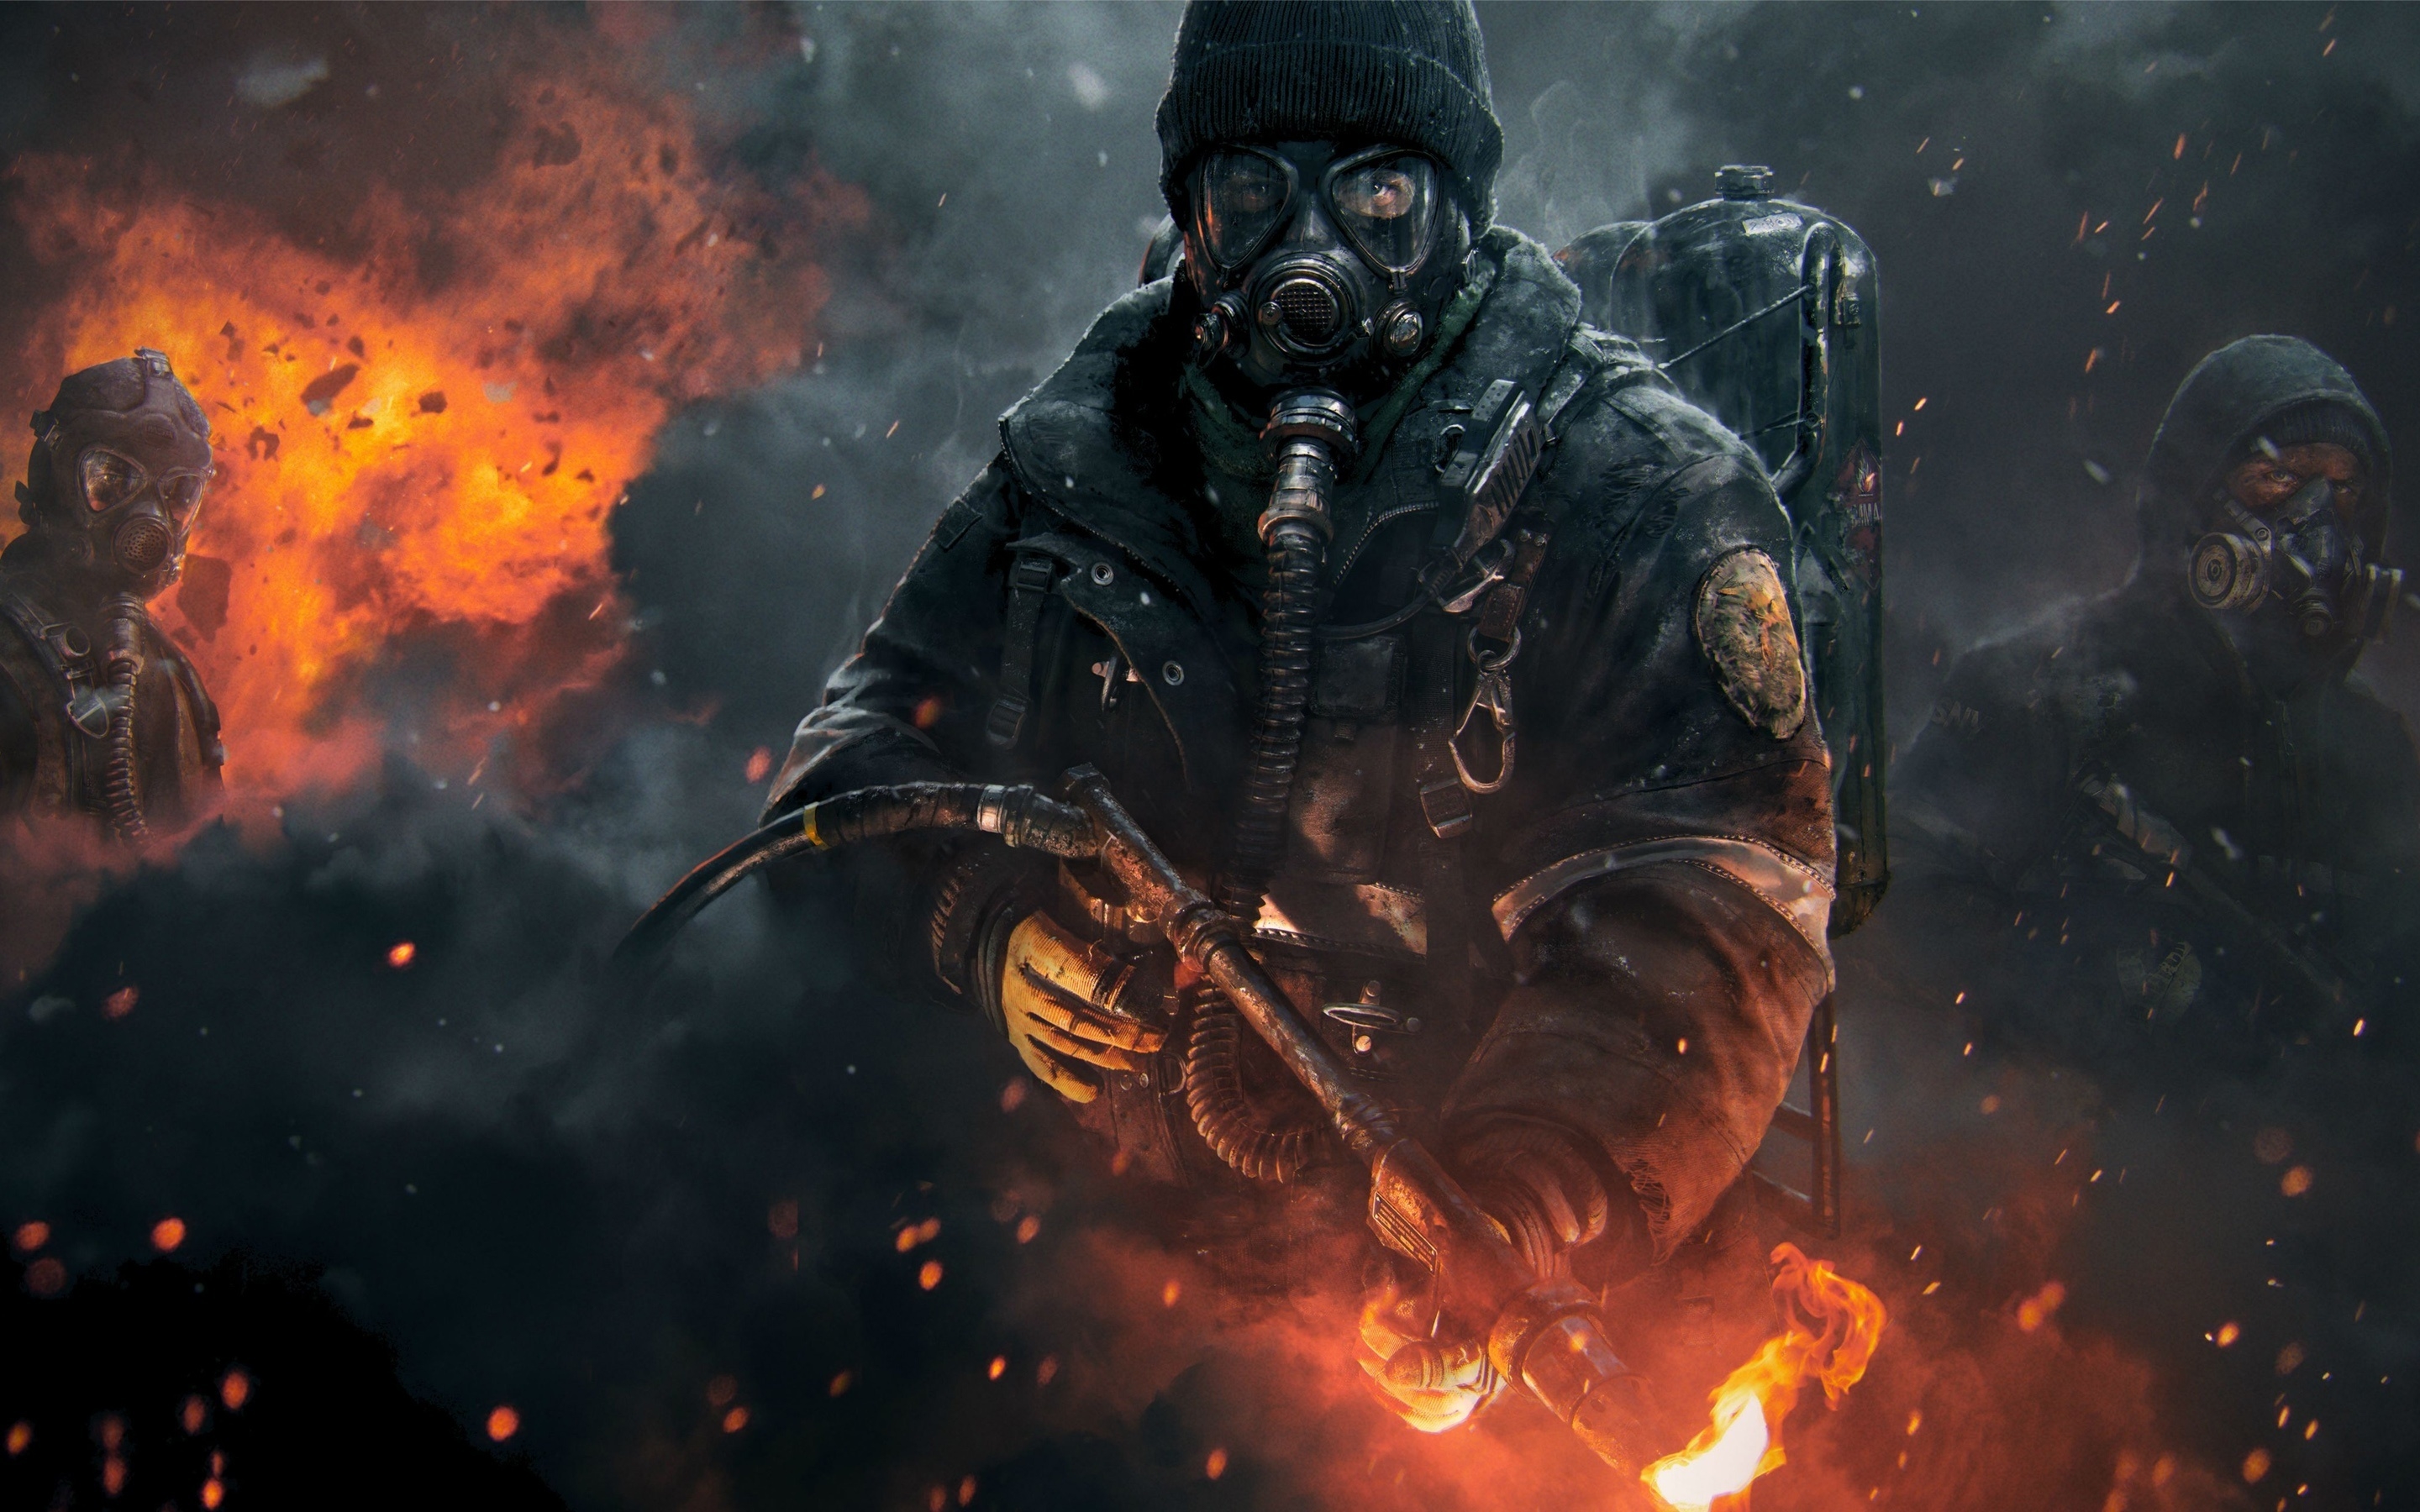 Tom Clancy's The Division for 2880 x 1800 Retina Display resolution